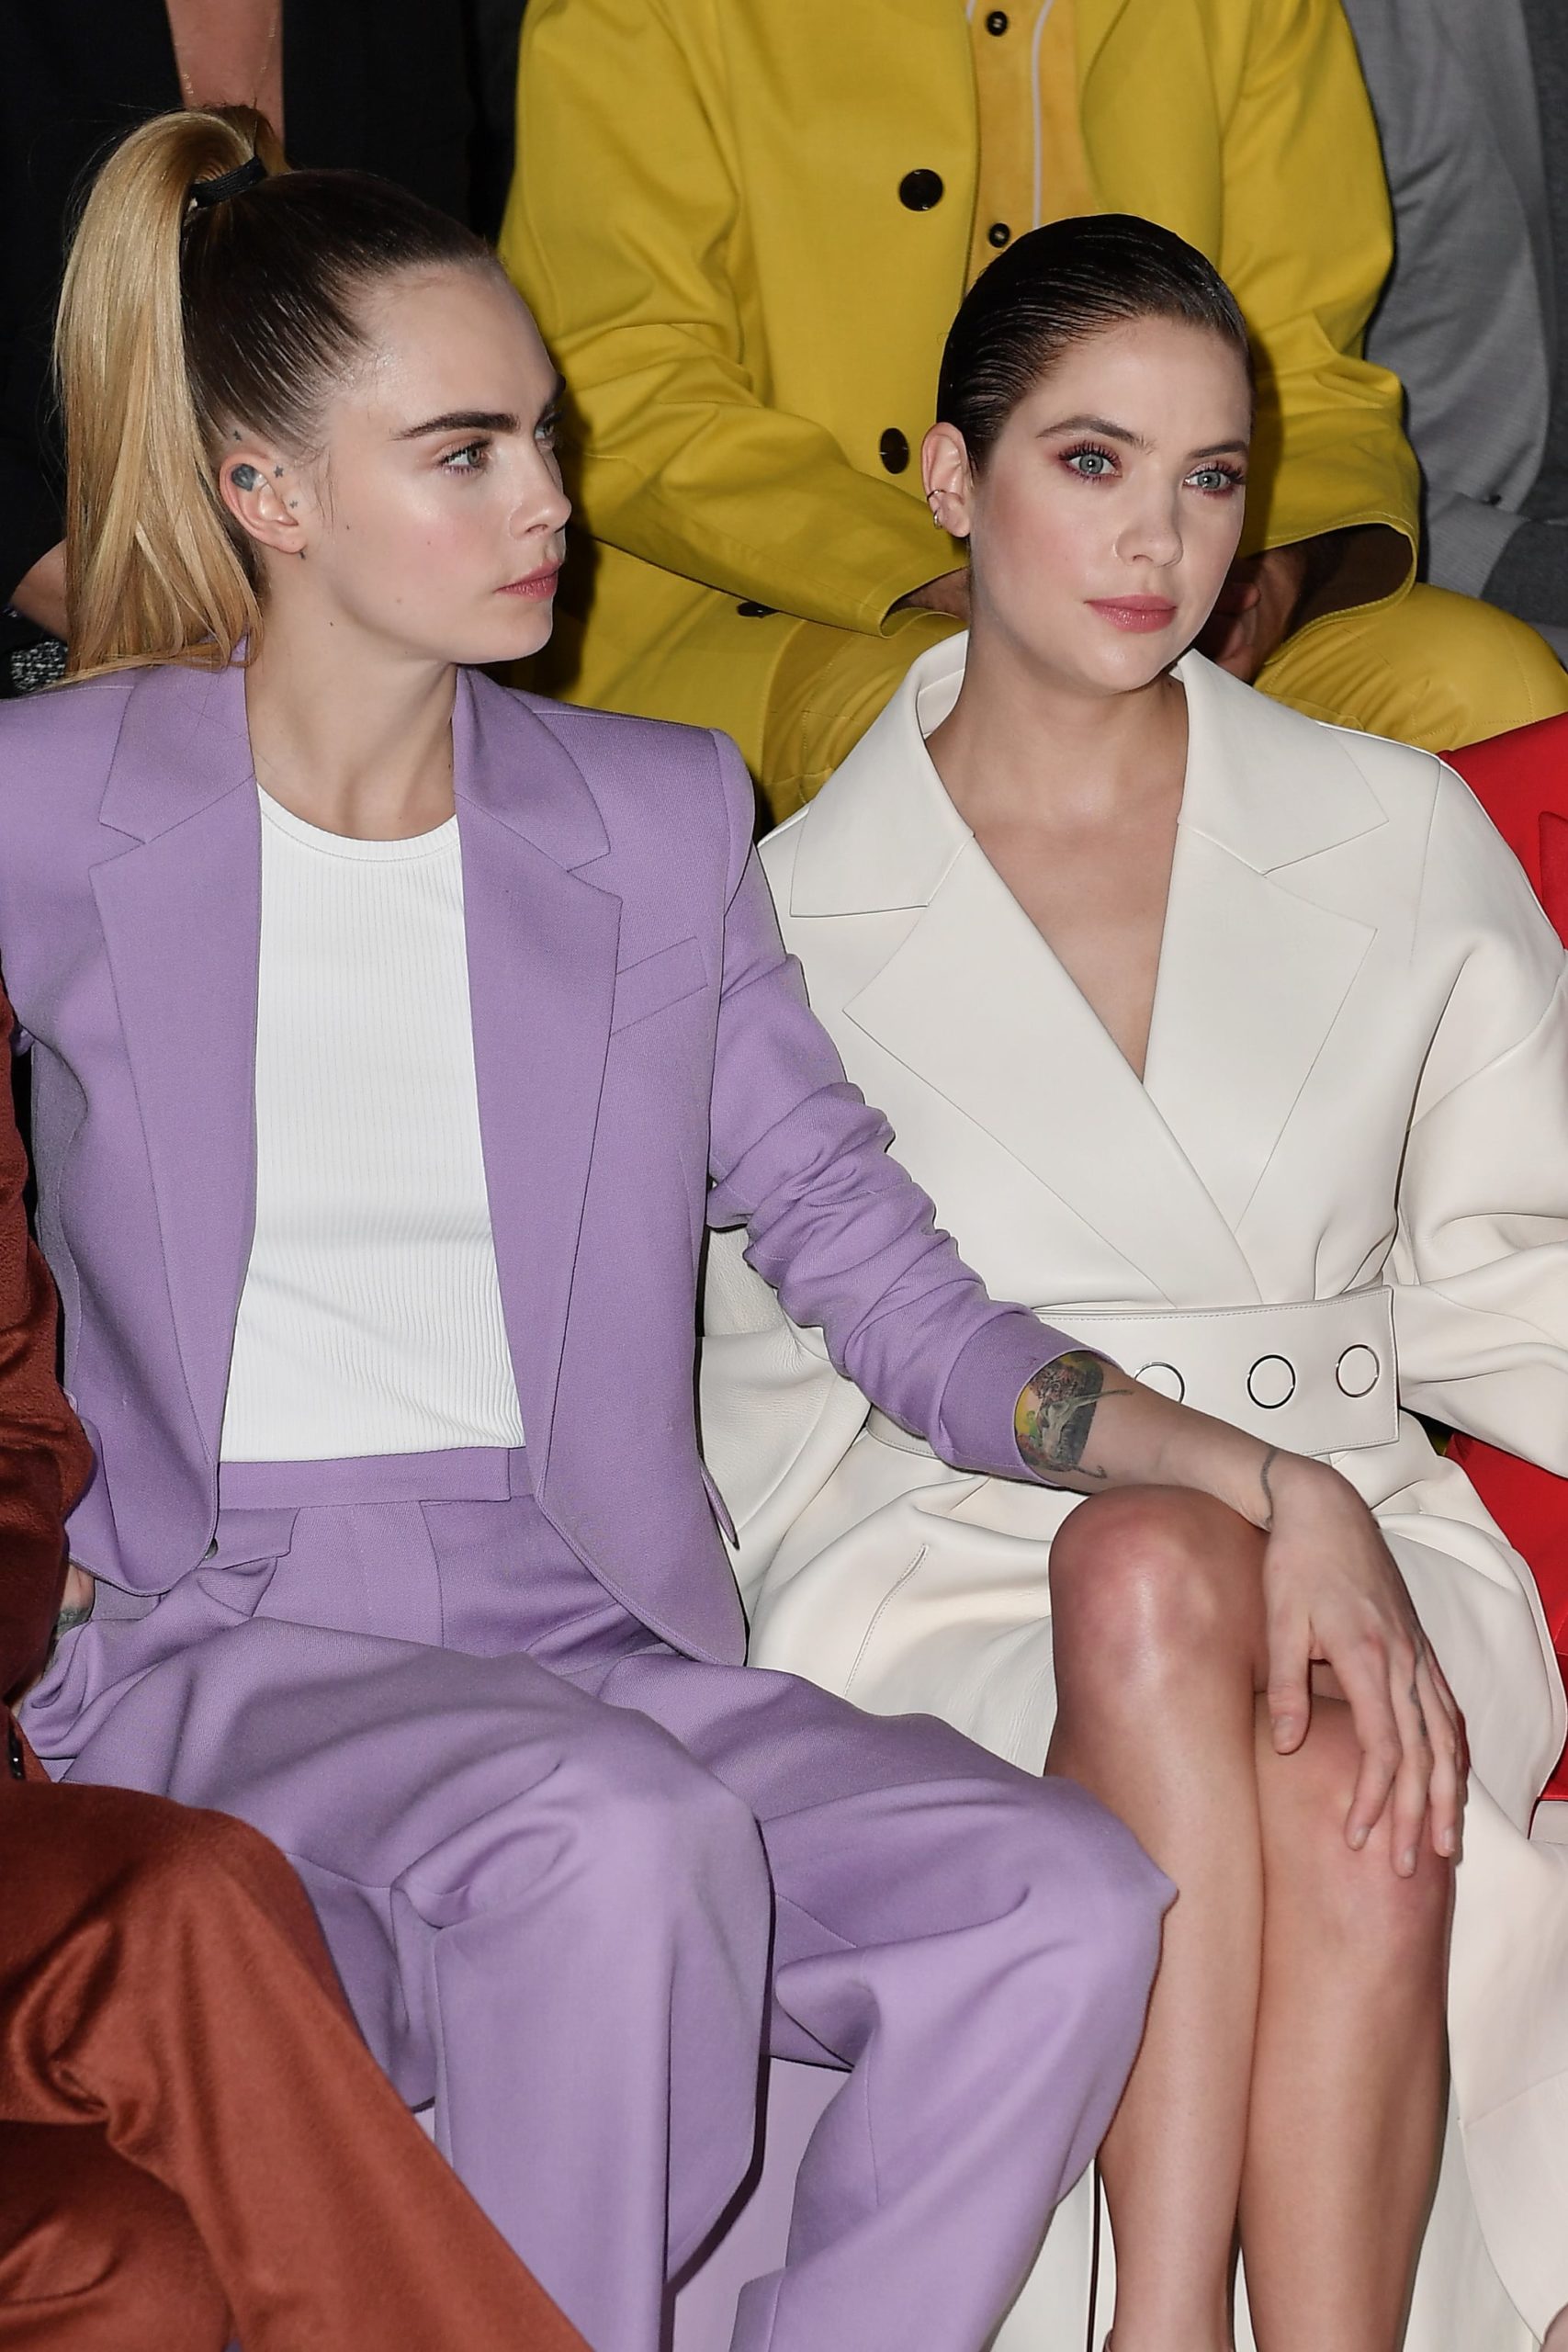 MILAN, ITALY - FEBRUARY 23:  Cara Delevingne and Ashley Benson attends the Boss fashion show on February 23, 2020 in Milan, Italy. (Photo by Jacopo Raule/WireImage)